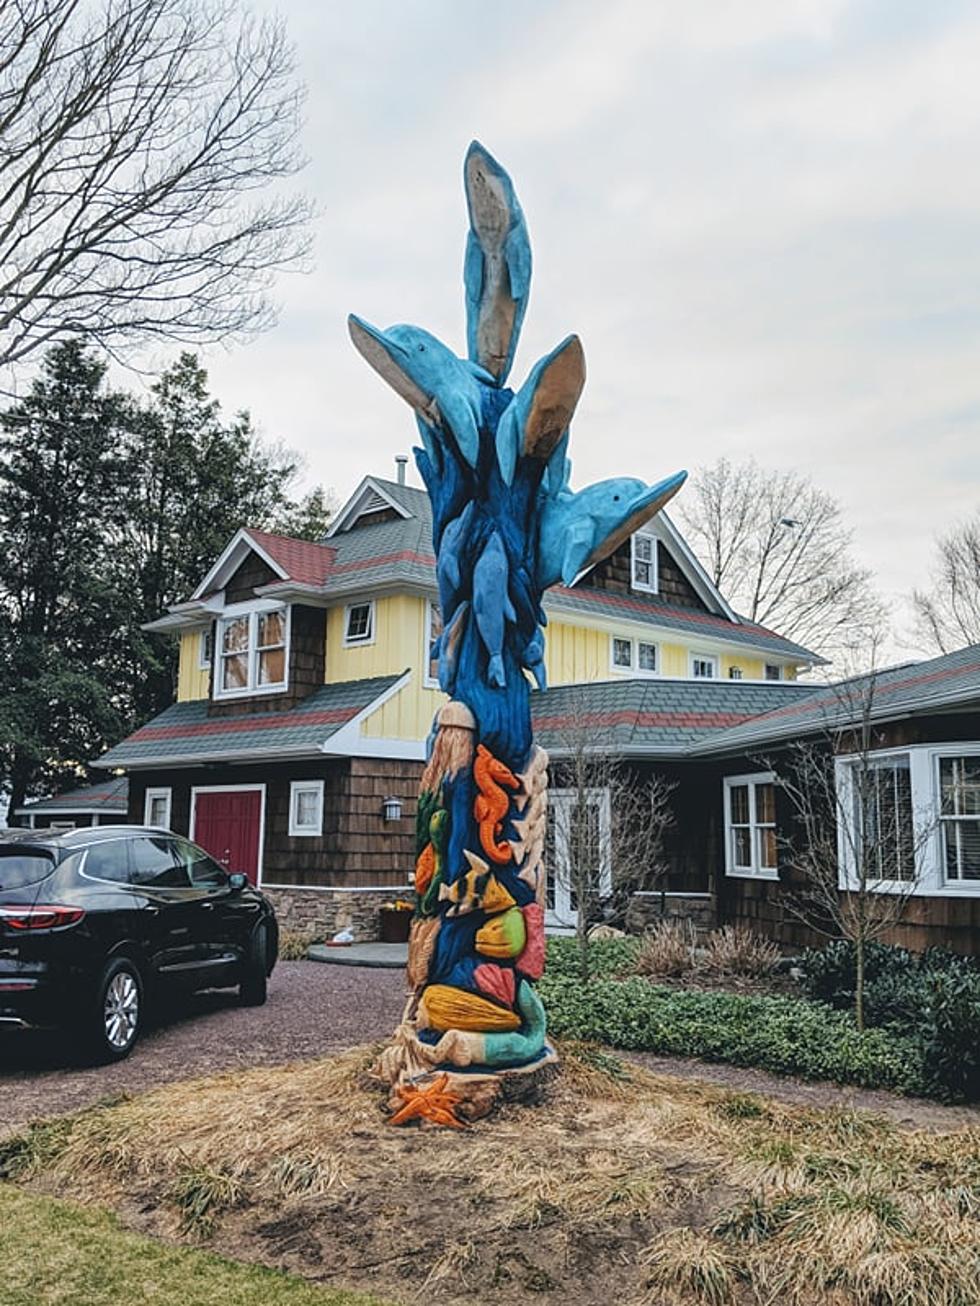 Have You Seen This Amazing Tree at the Jersey Shore